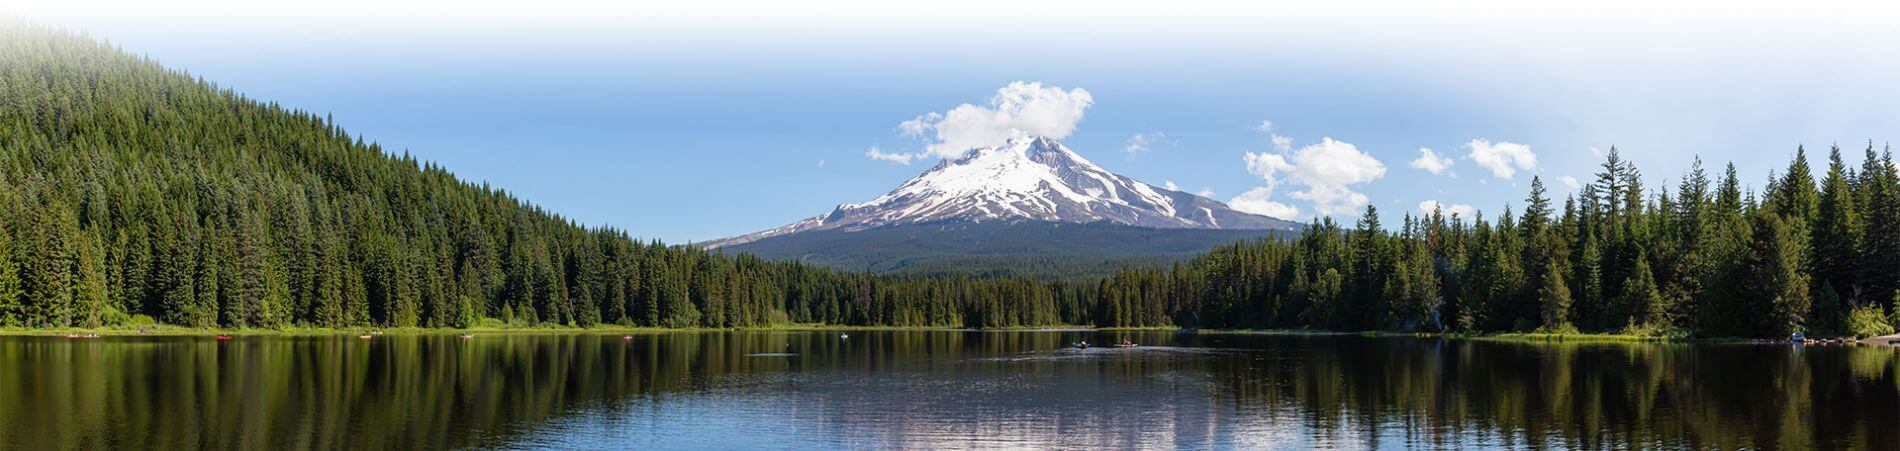 Beautiful Panoramic Landscape View of a Lake with Mt Hood.